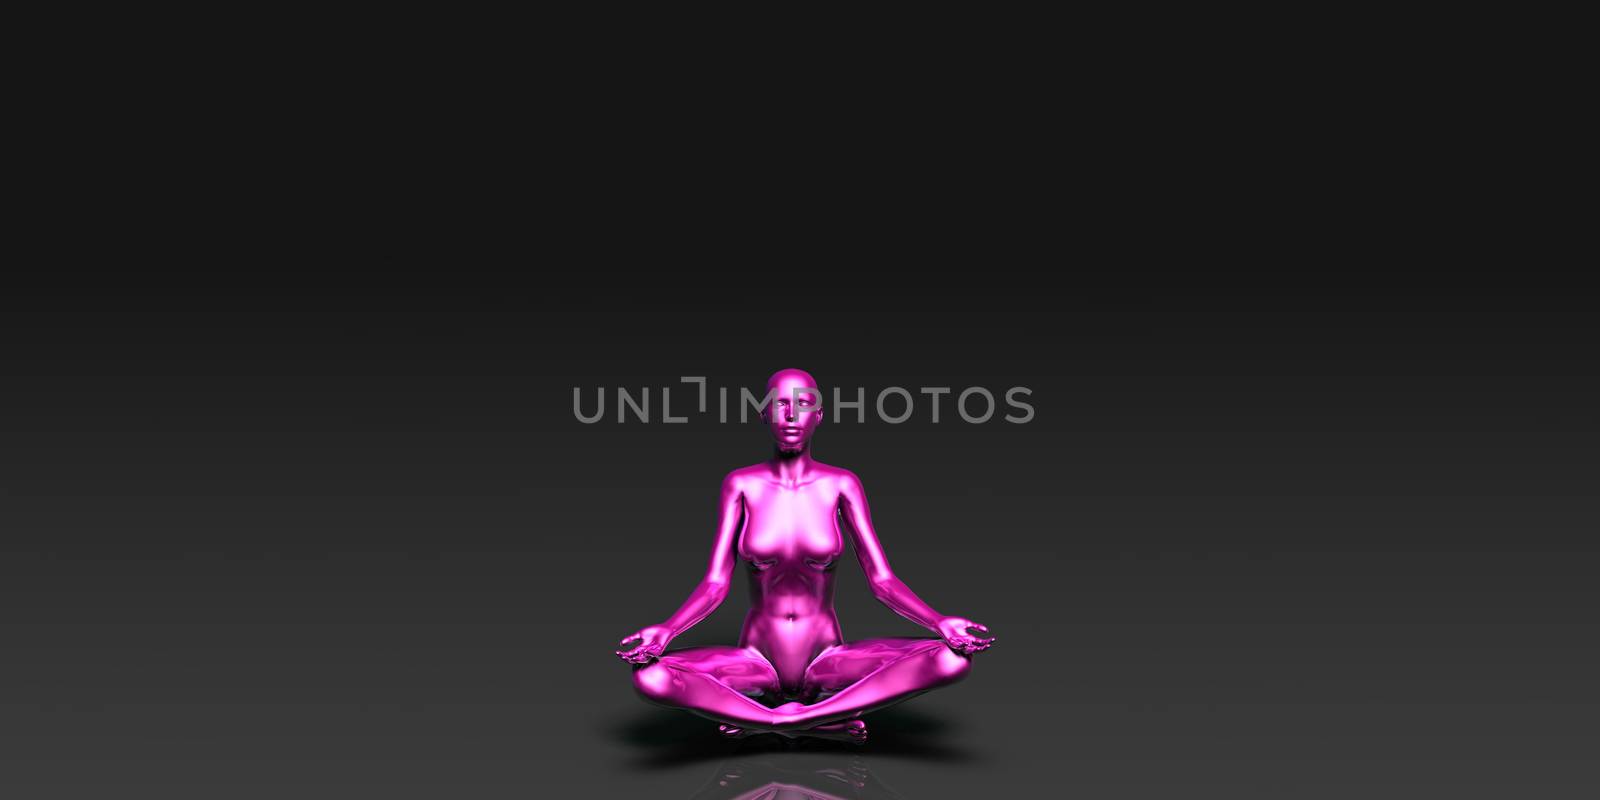 The Lotus Position Yoga Pose by kentoh